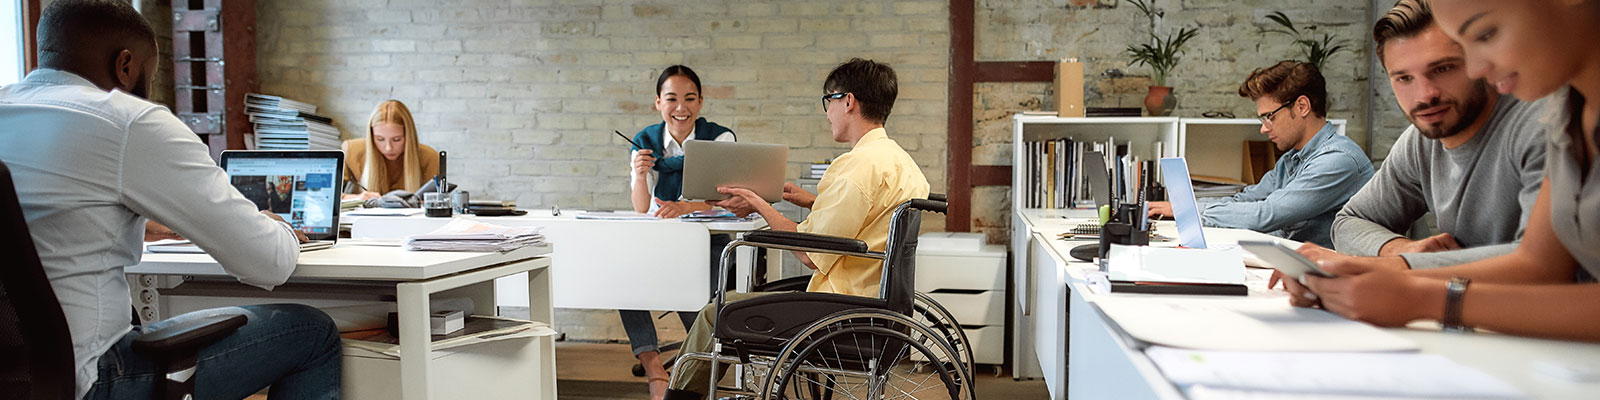 Man in wheelchair consults with coworker